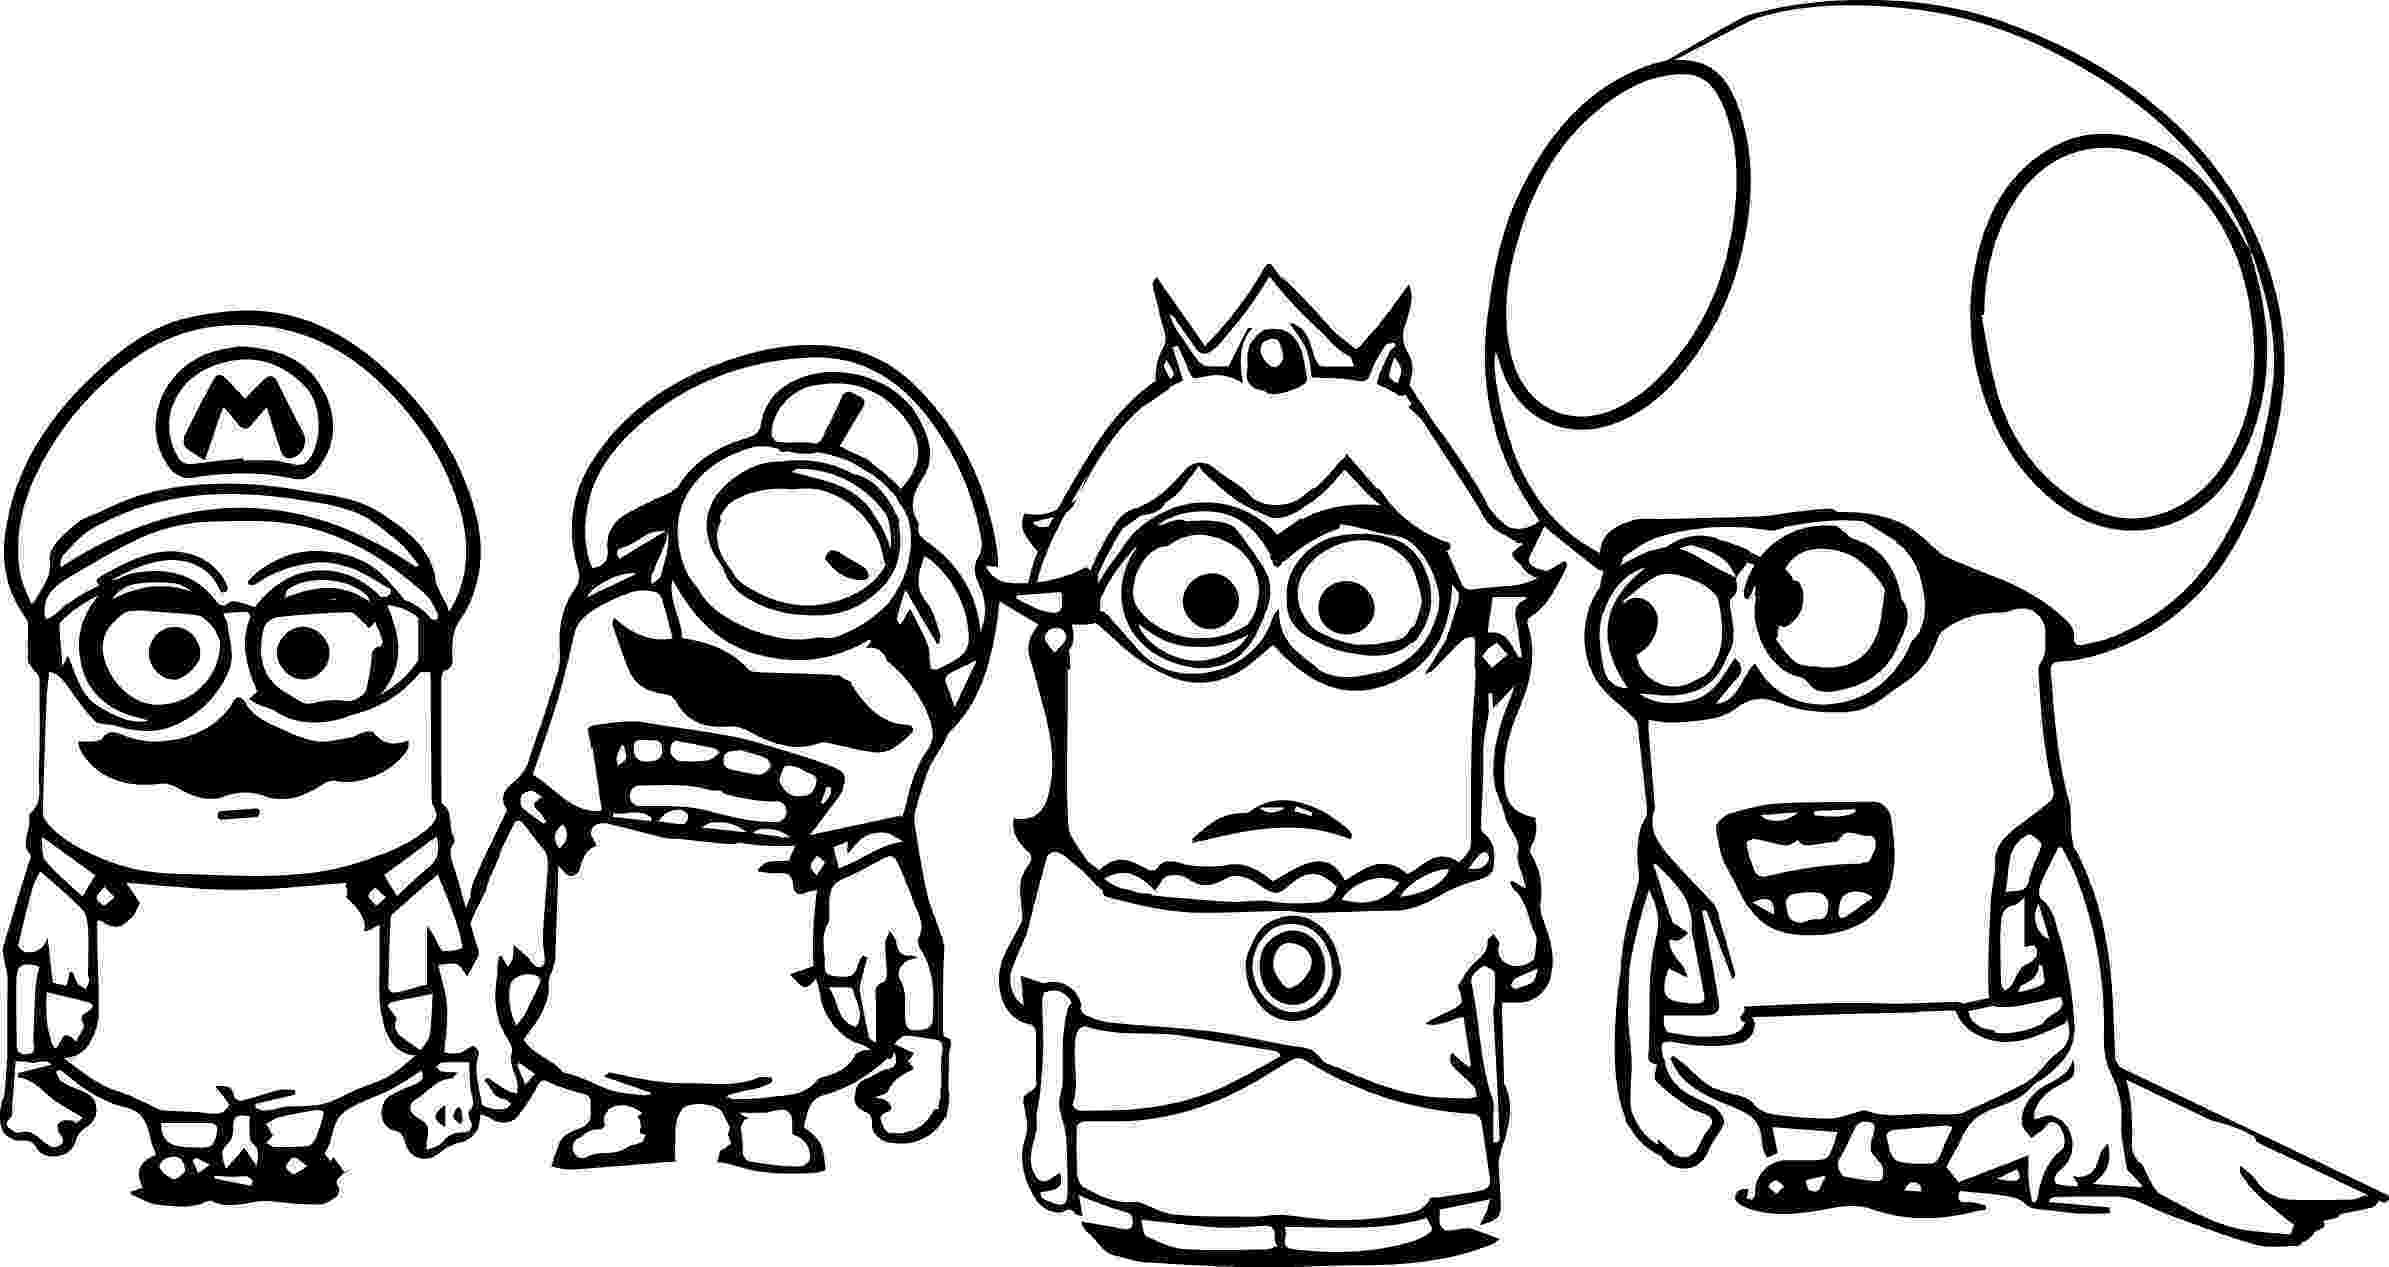 coloring pages online minions minion coloring pages best coloring pages for kids online coloring minions pages 1 1